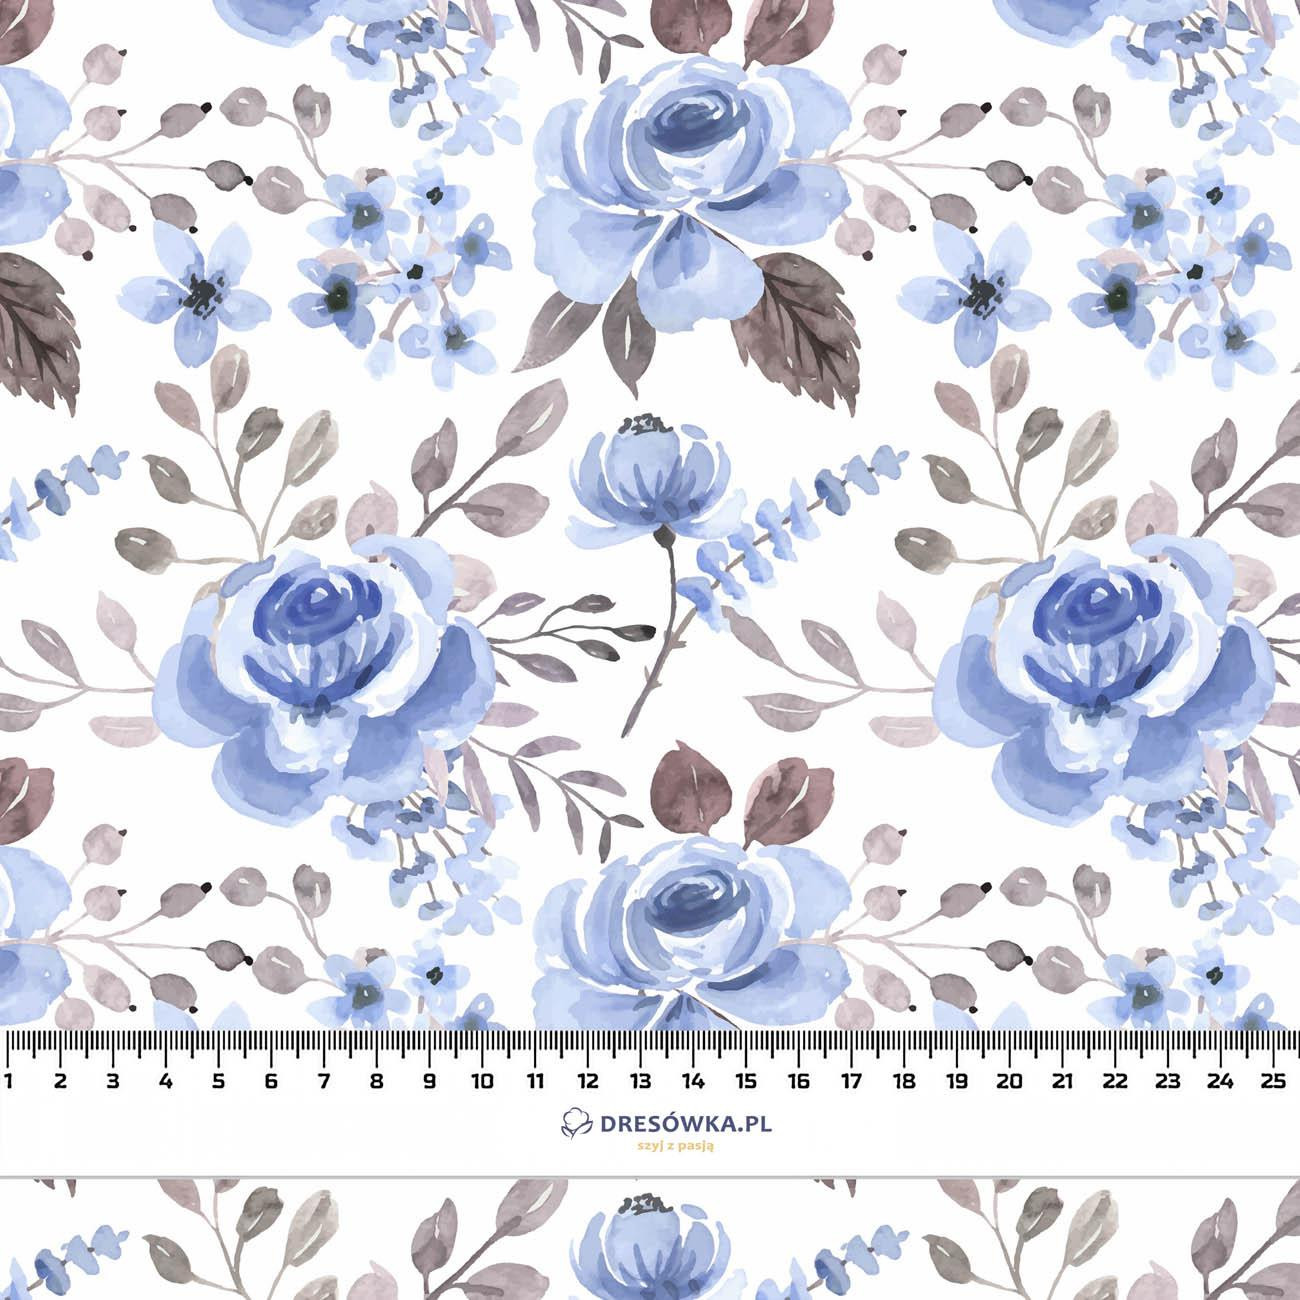 BLUE FLOWERS - Cotton drill